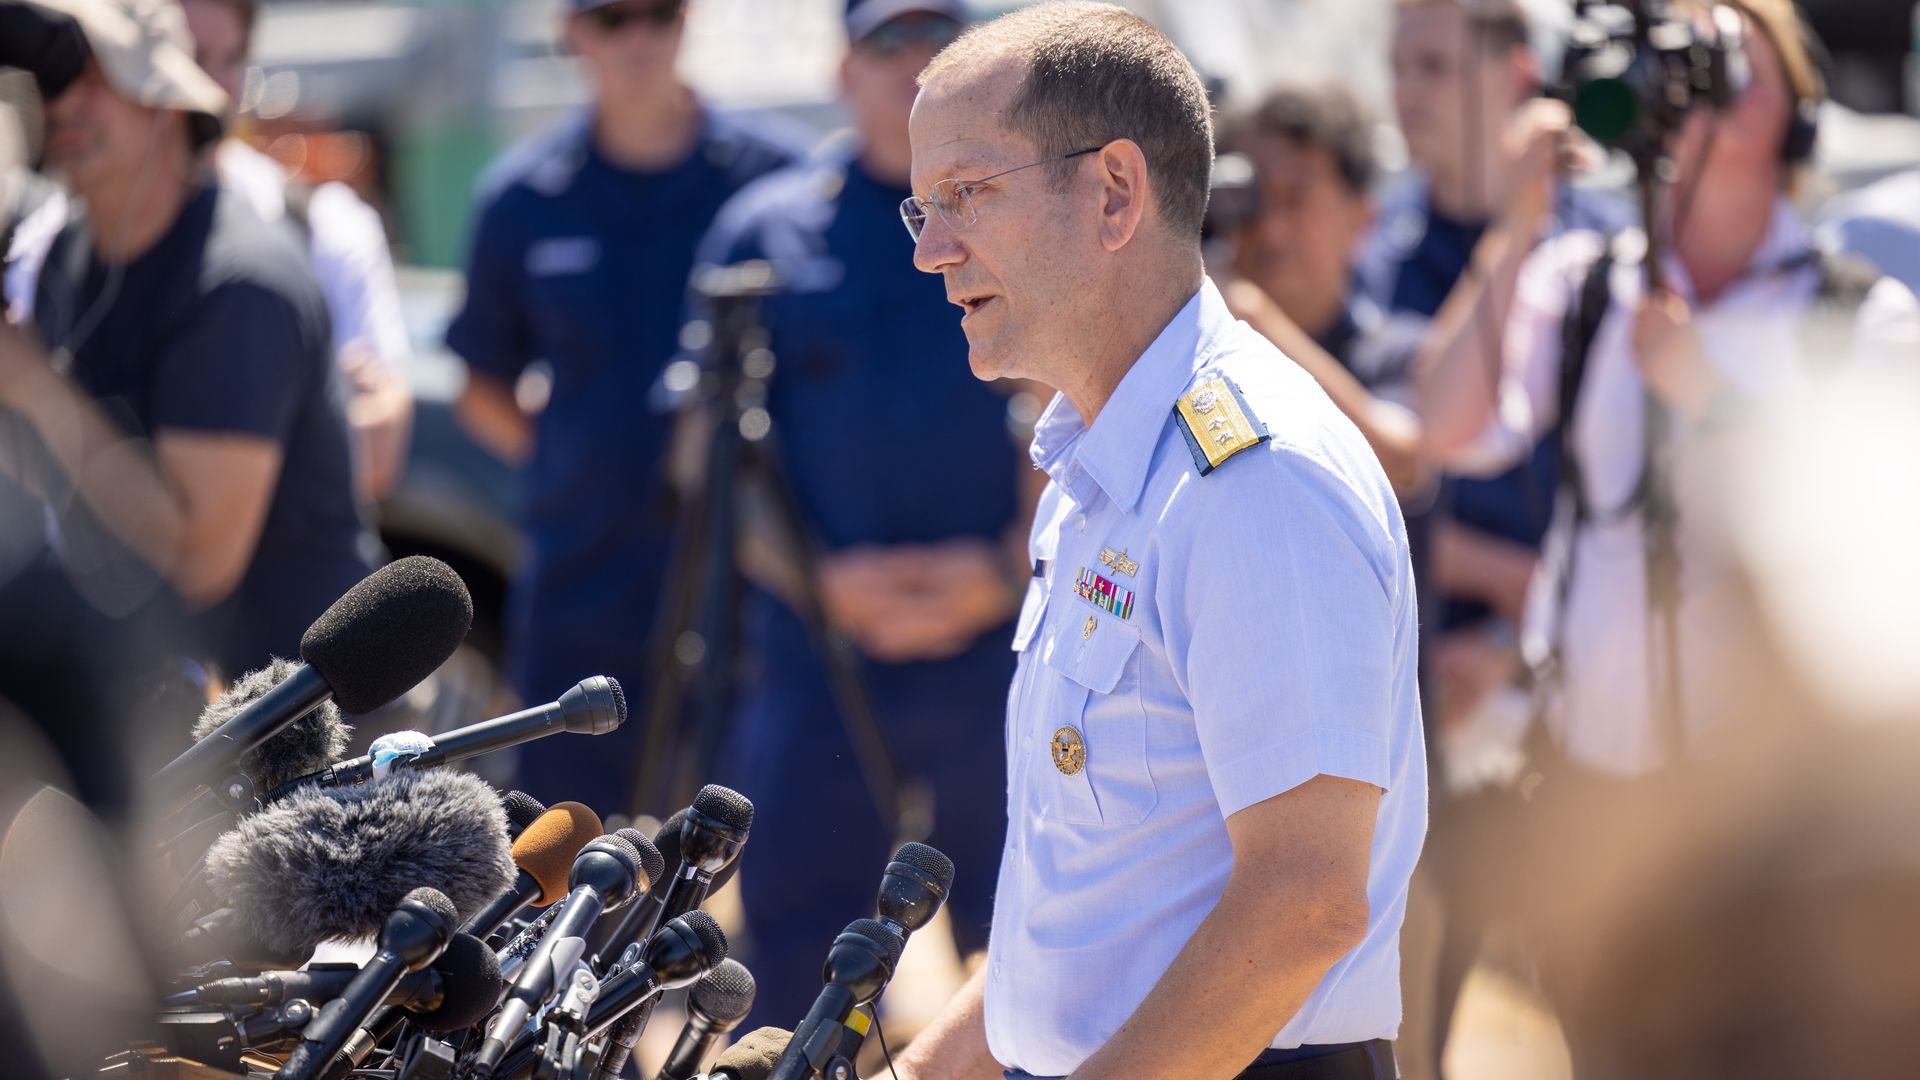 Rear Adm. John Mauger, the First Coast Guard District commander, speaking to reporters in Boston, Massachusetts, on June 22.